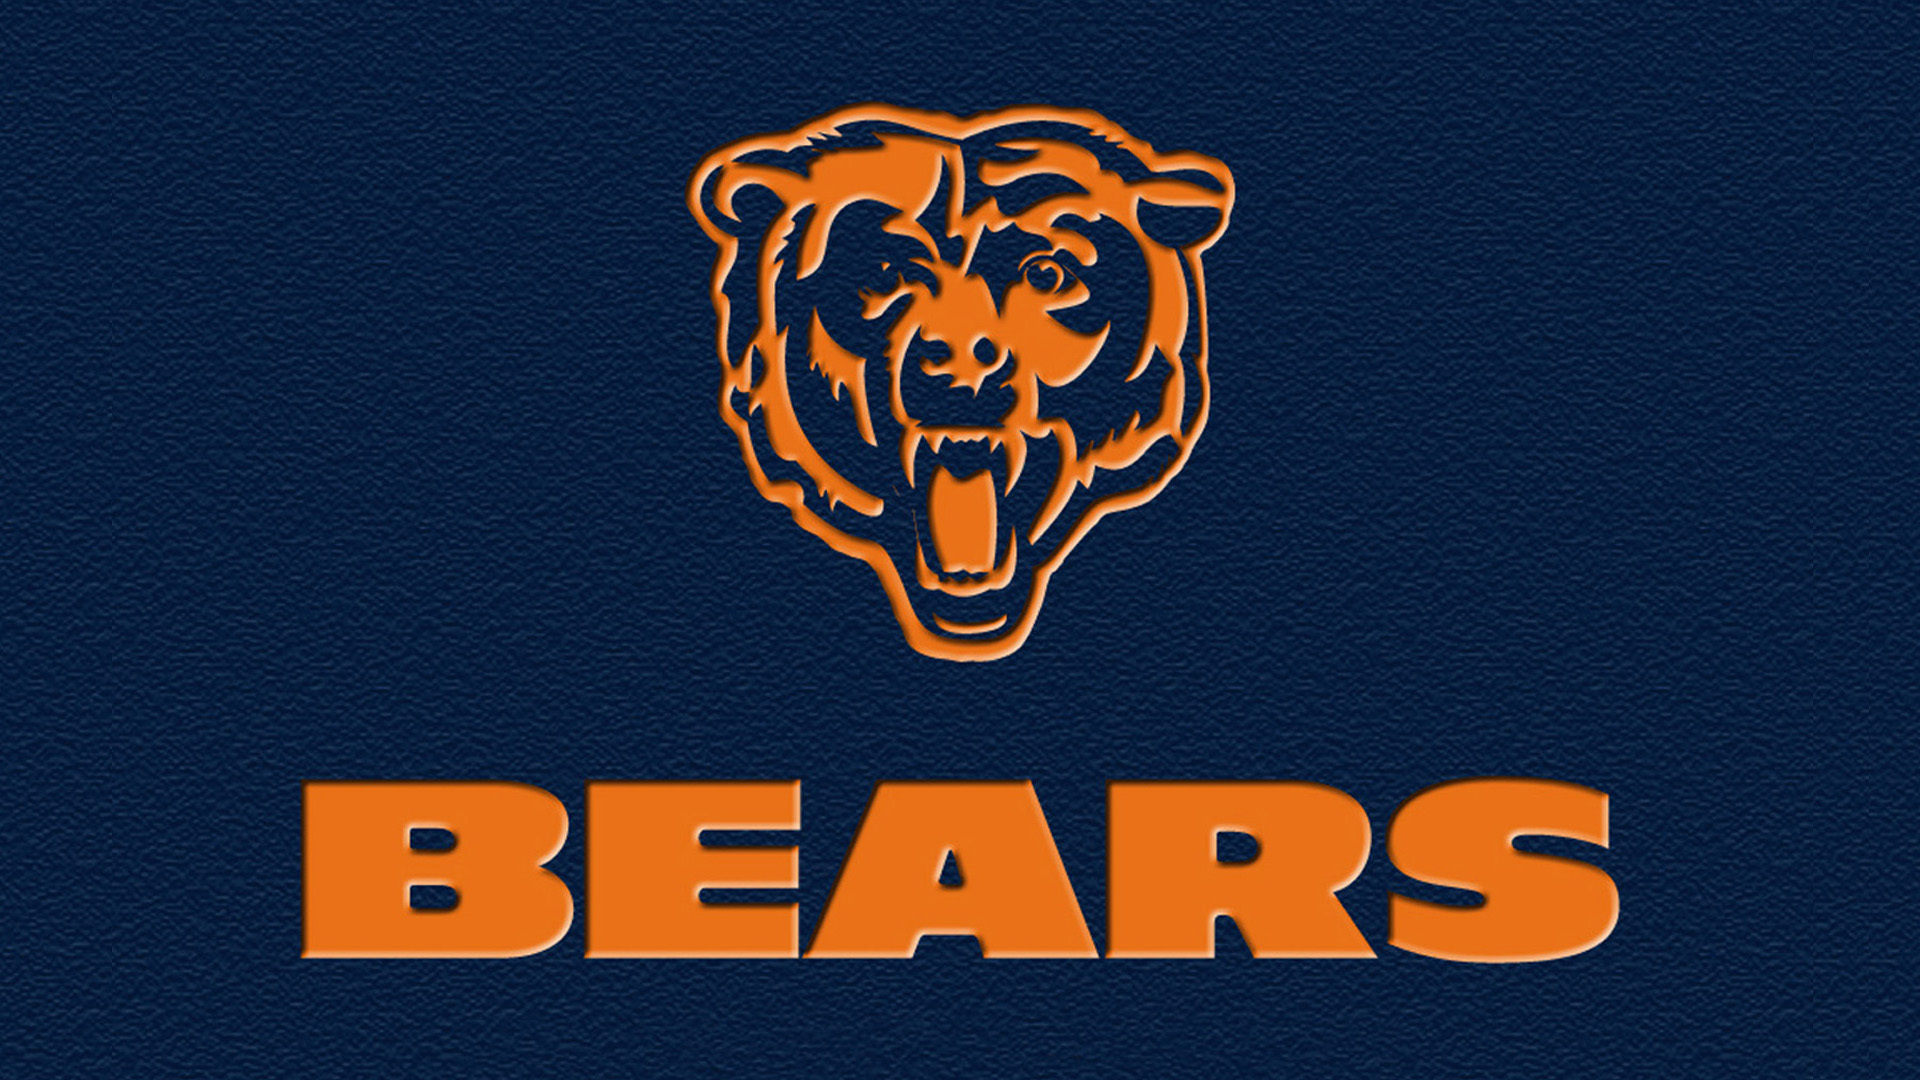 Chicago Bears Wallpapers Images Photos Pictures Backgrounds 1920x1080